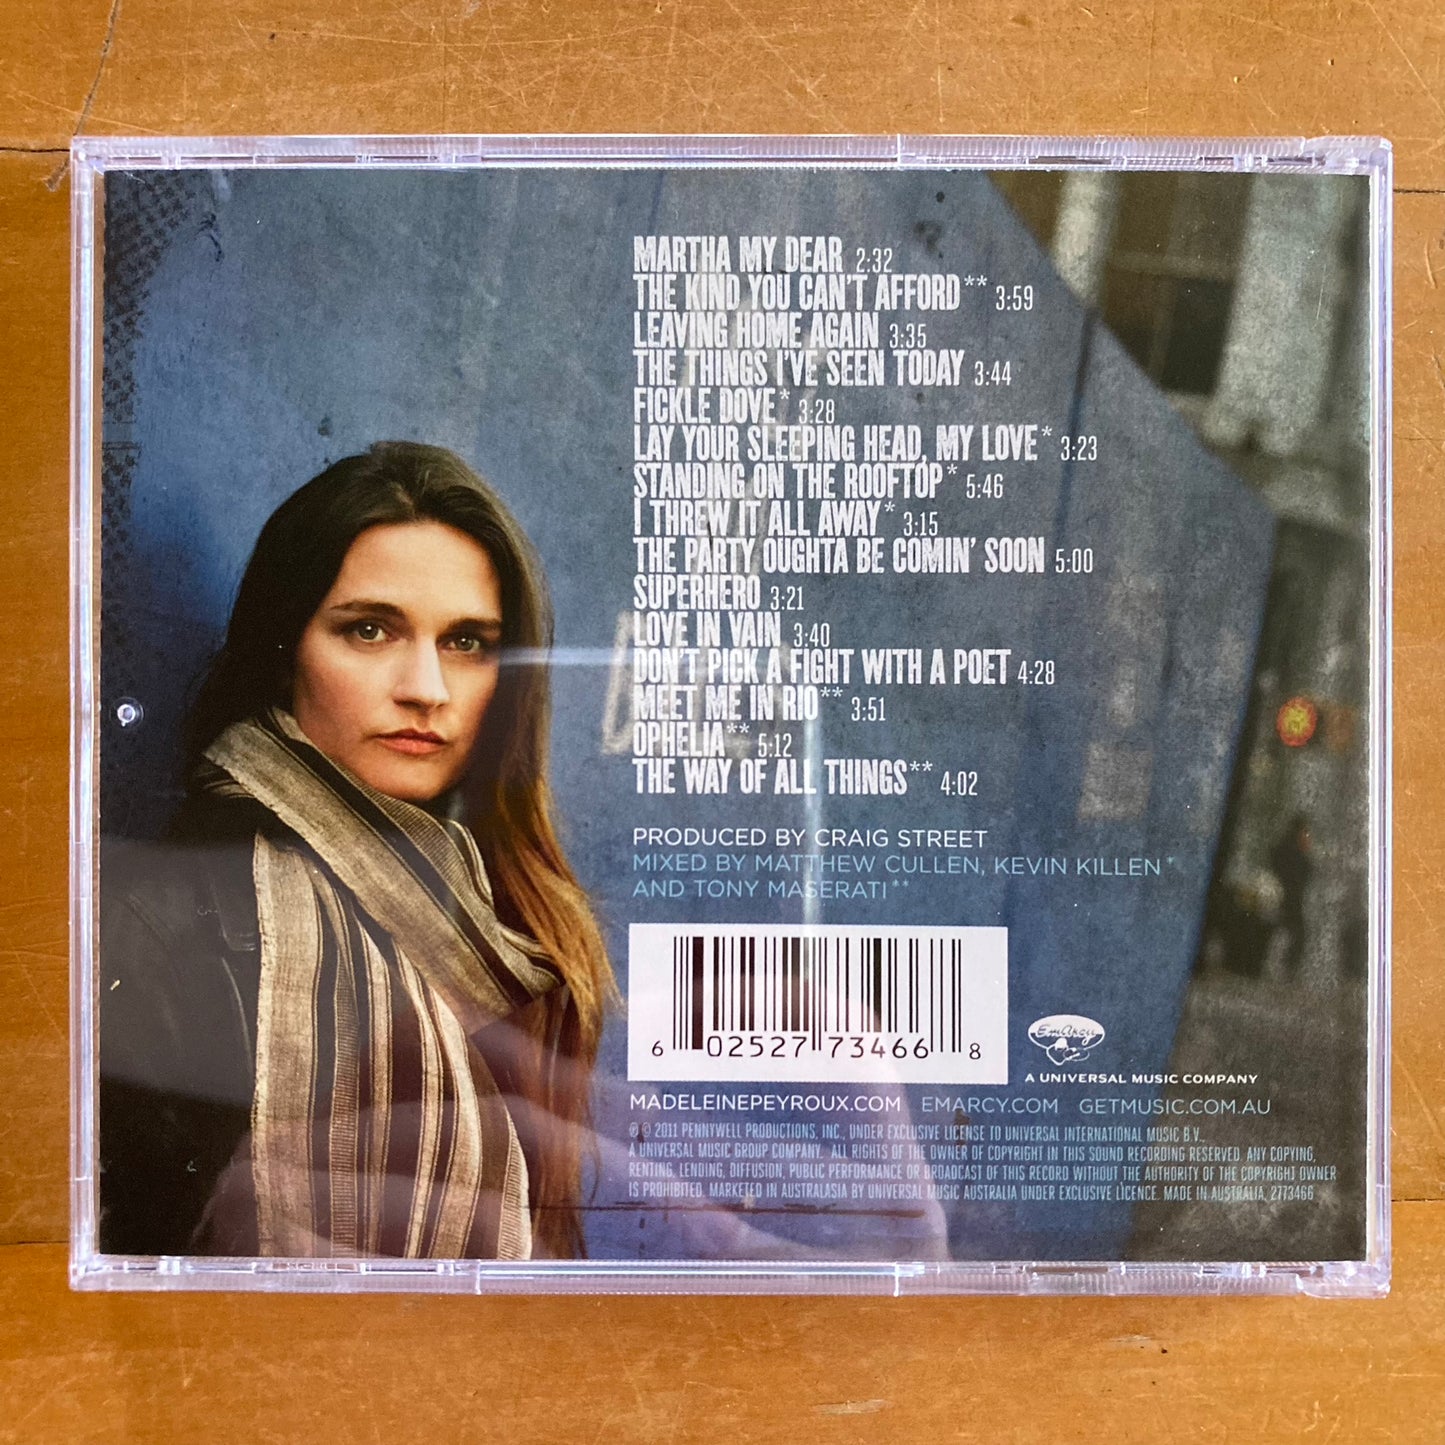 Madeleine Peyroux - Standing On The Rooftop (CD)